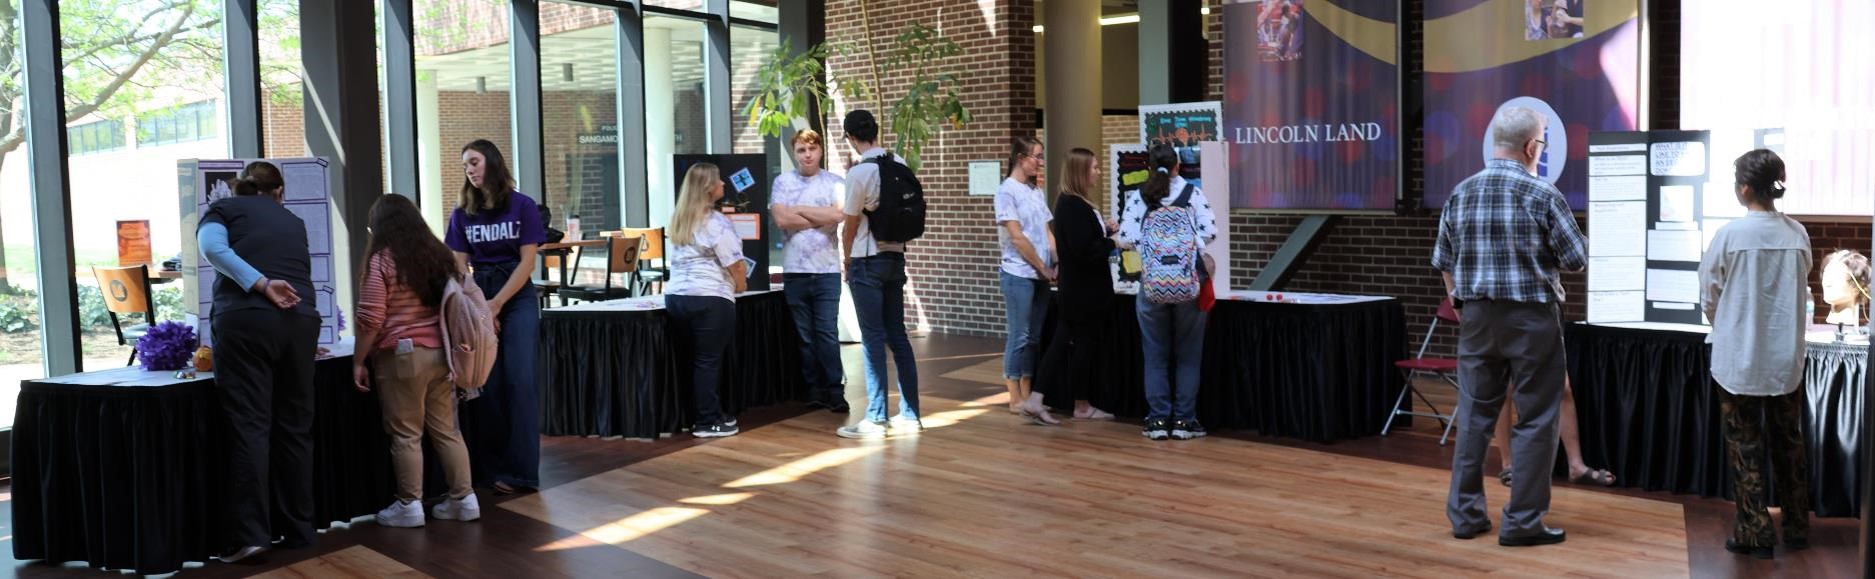 NDT students providing poster presentations at tables in A. Lincoln Commons